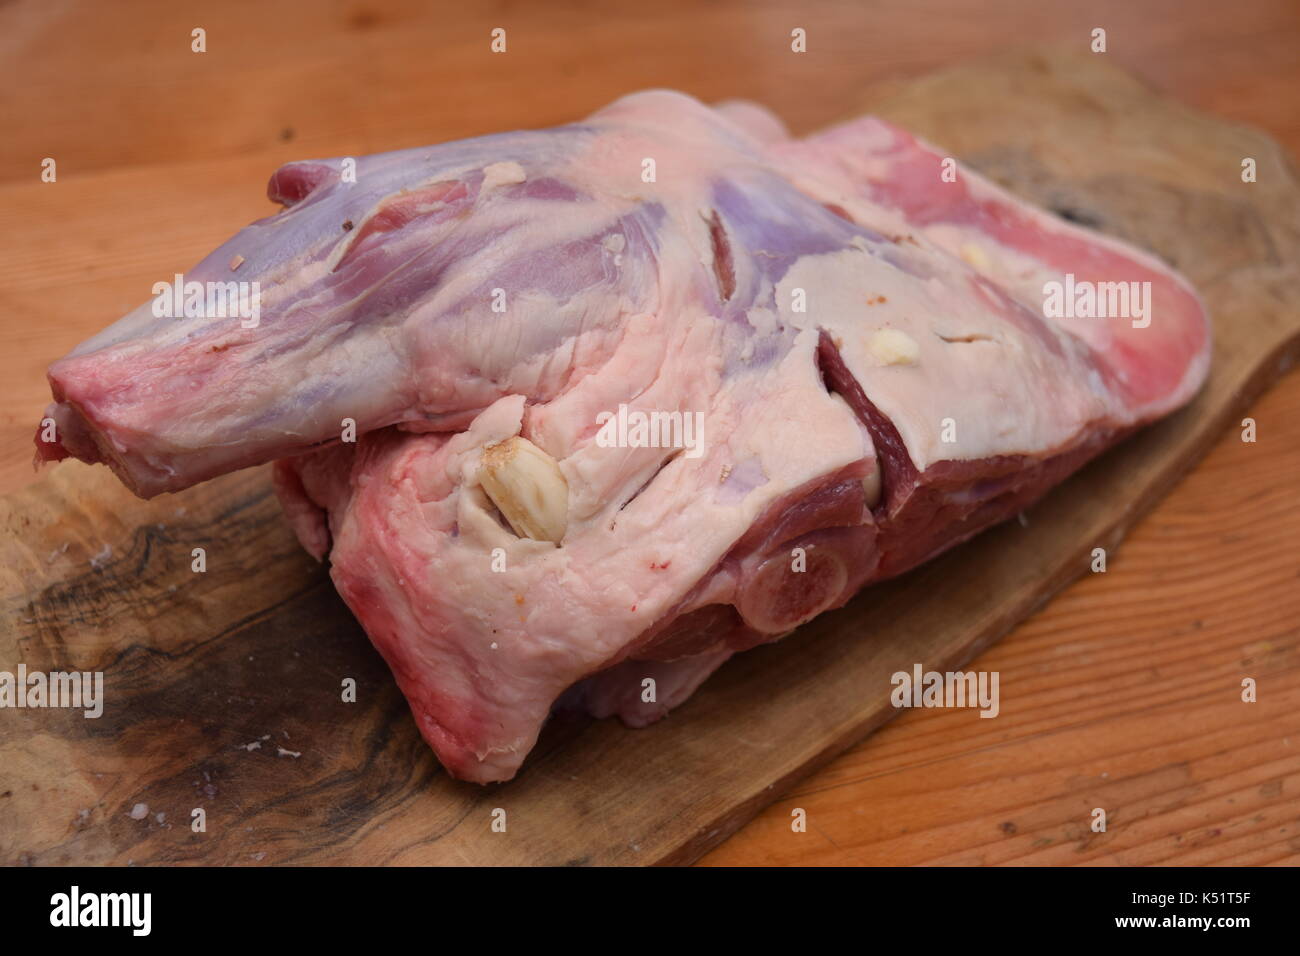 Raw meat on a wooden surface ready to cook Stock Photo